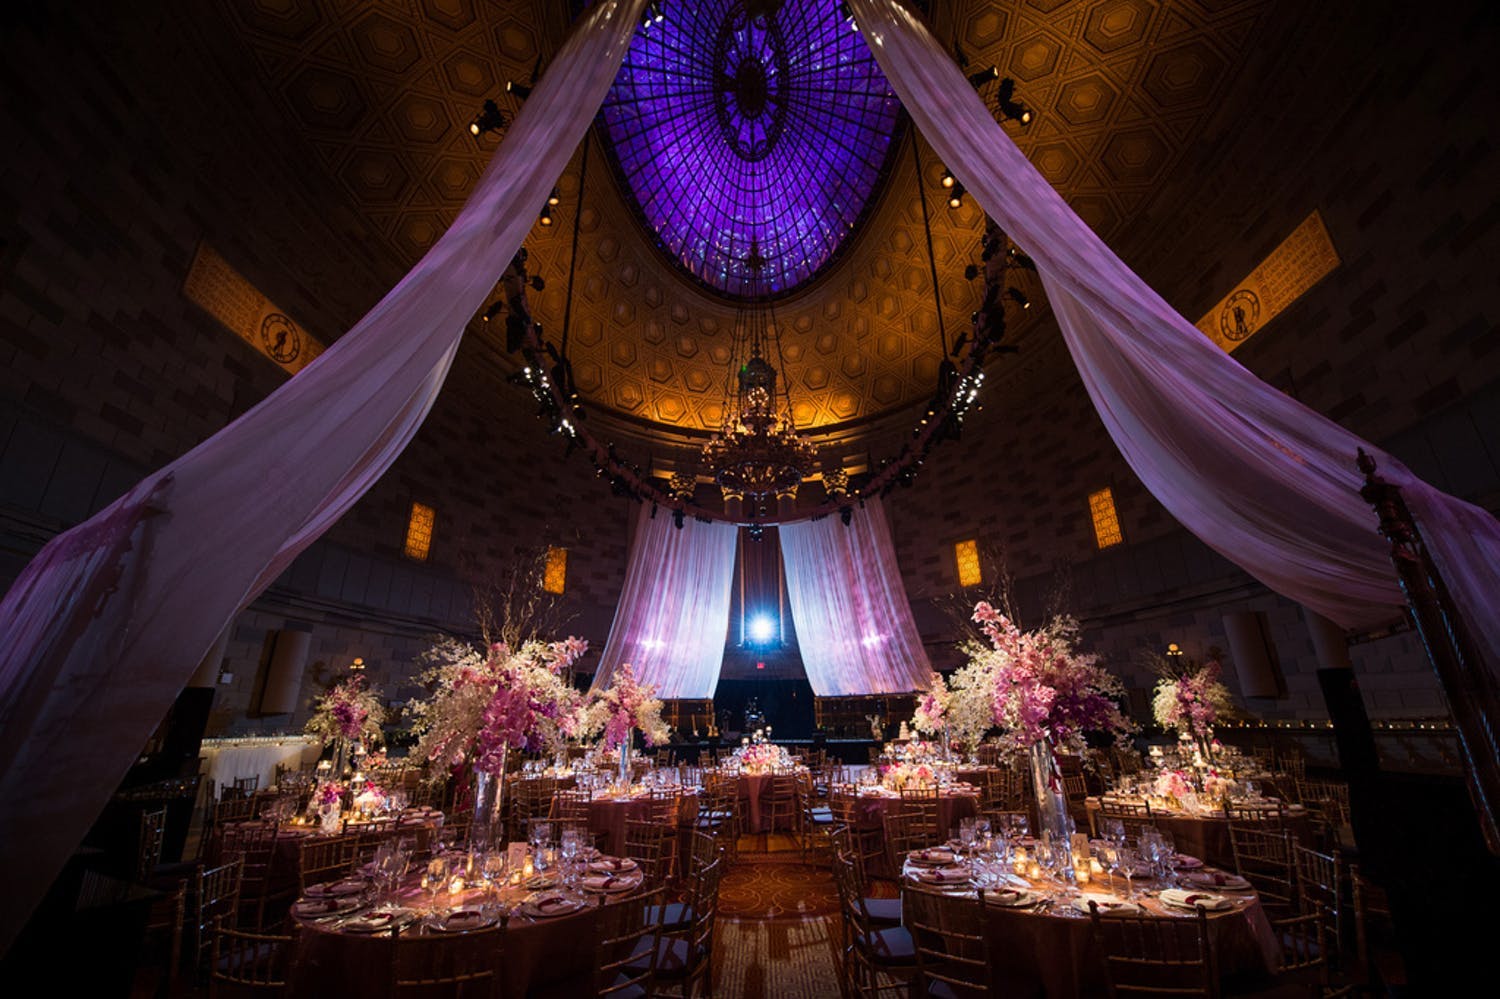 Dramatic Soaring Purple and Gold Ceiling With Ethereal Violet Wedding Drapery Suspended from Ceiling | PartySlate